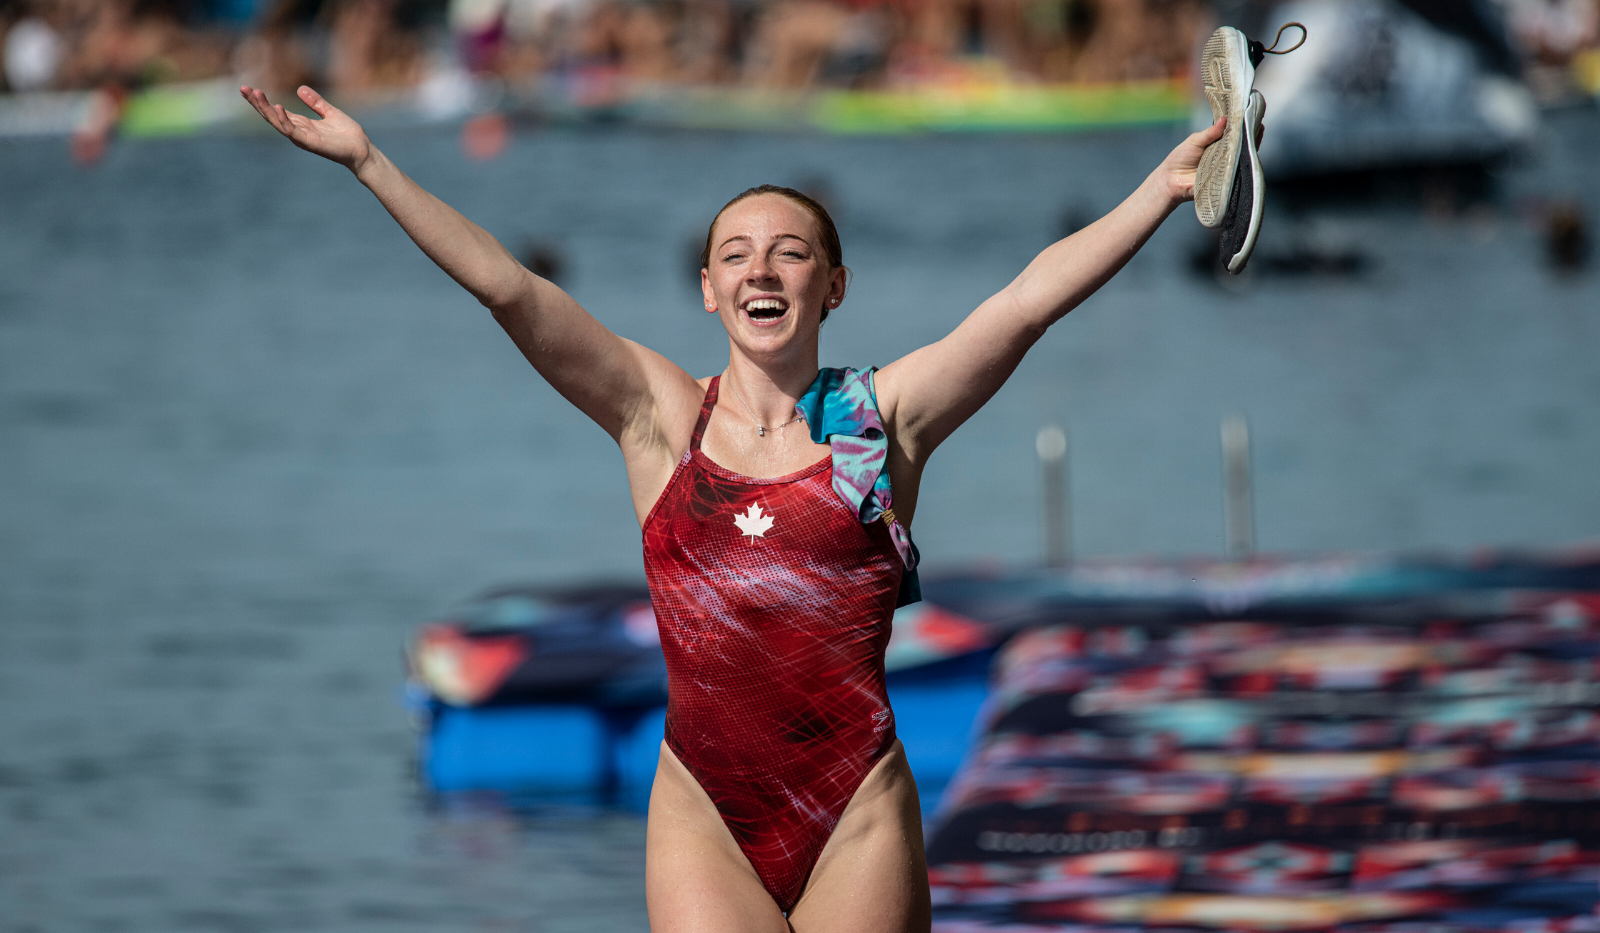 Carlson second, Macaulay sixth at final event of Red Bull Cliff Diving World Series season